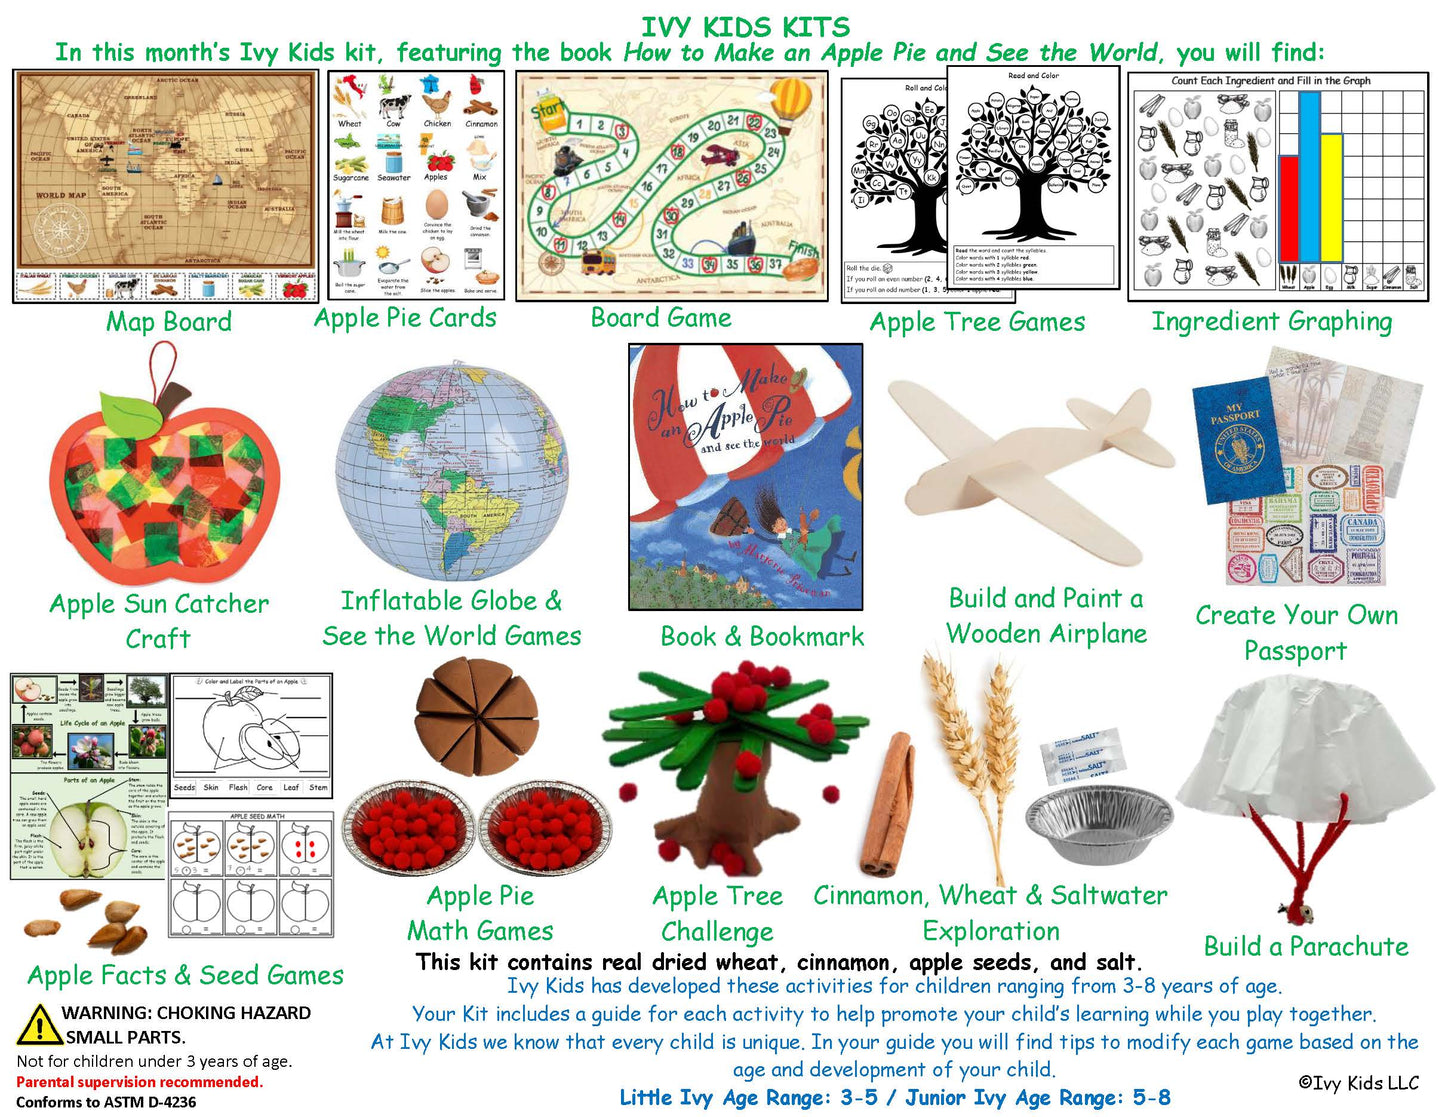 How to Make an Apple and See the World Activities Lesson Plan